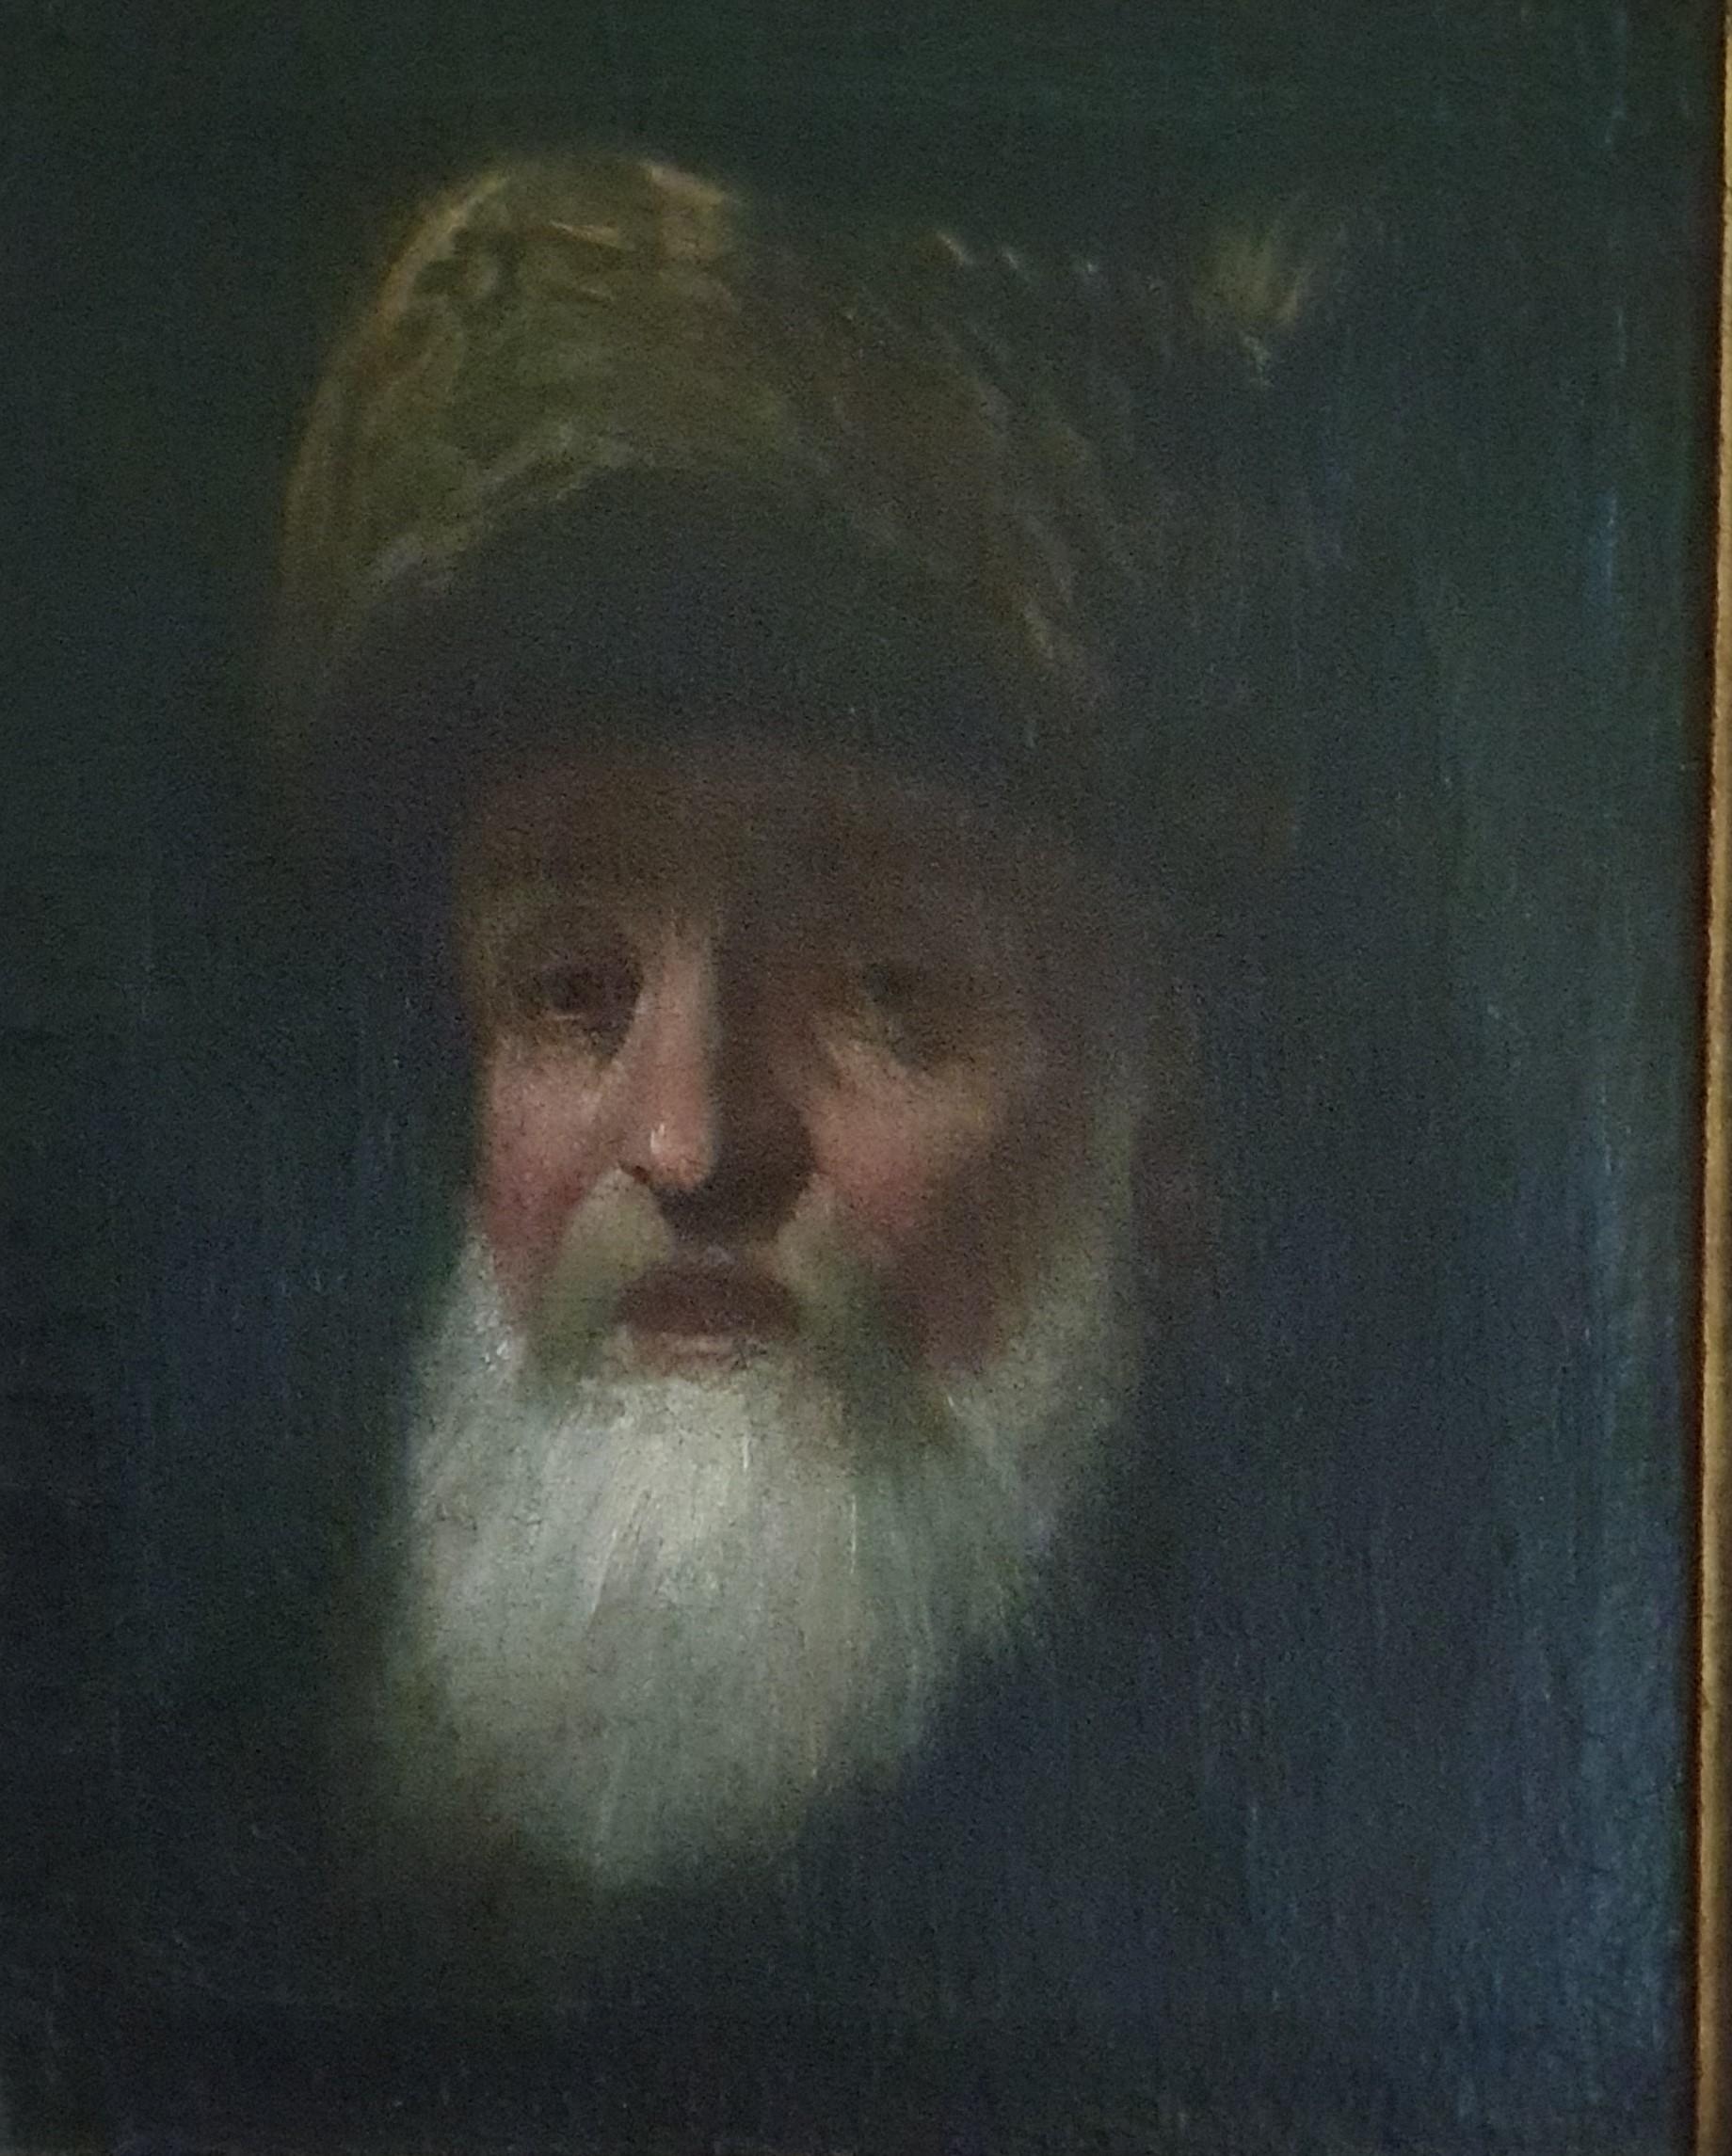 A late 18th century painting in the style of Rembrandt, in fine condition with no restorations and immaculate finish. Painting depicts Jewish Religious leader The Rabbi. All parts are original and no restoration has been done, in pristine original